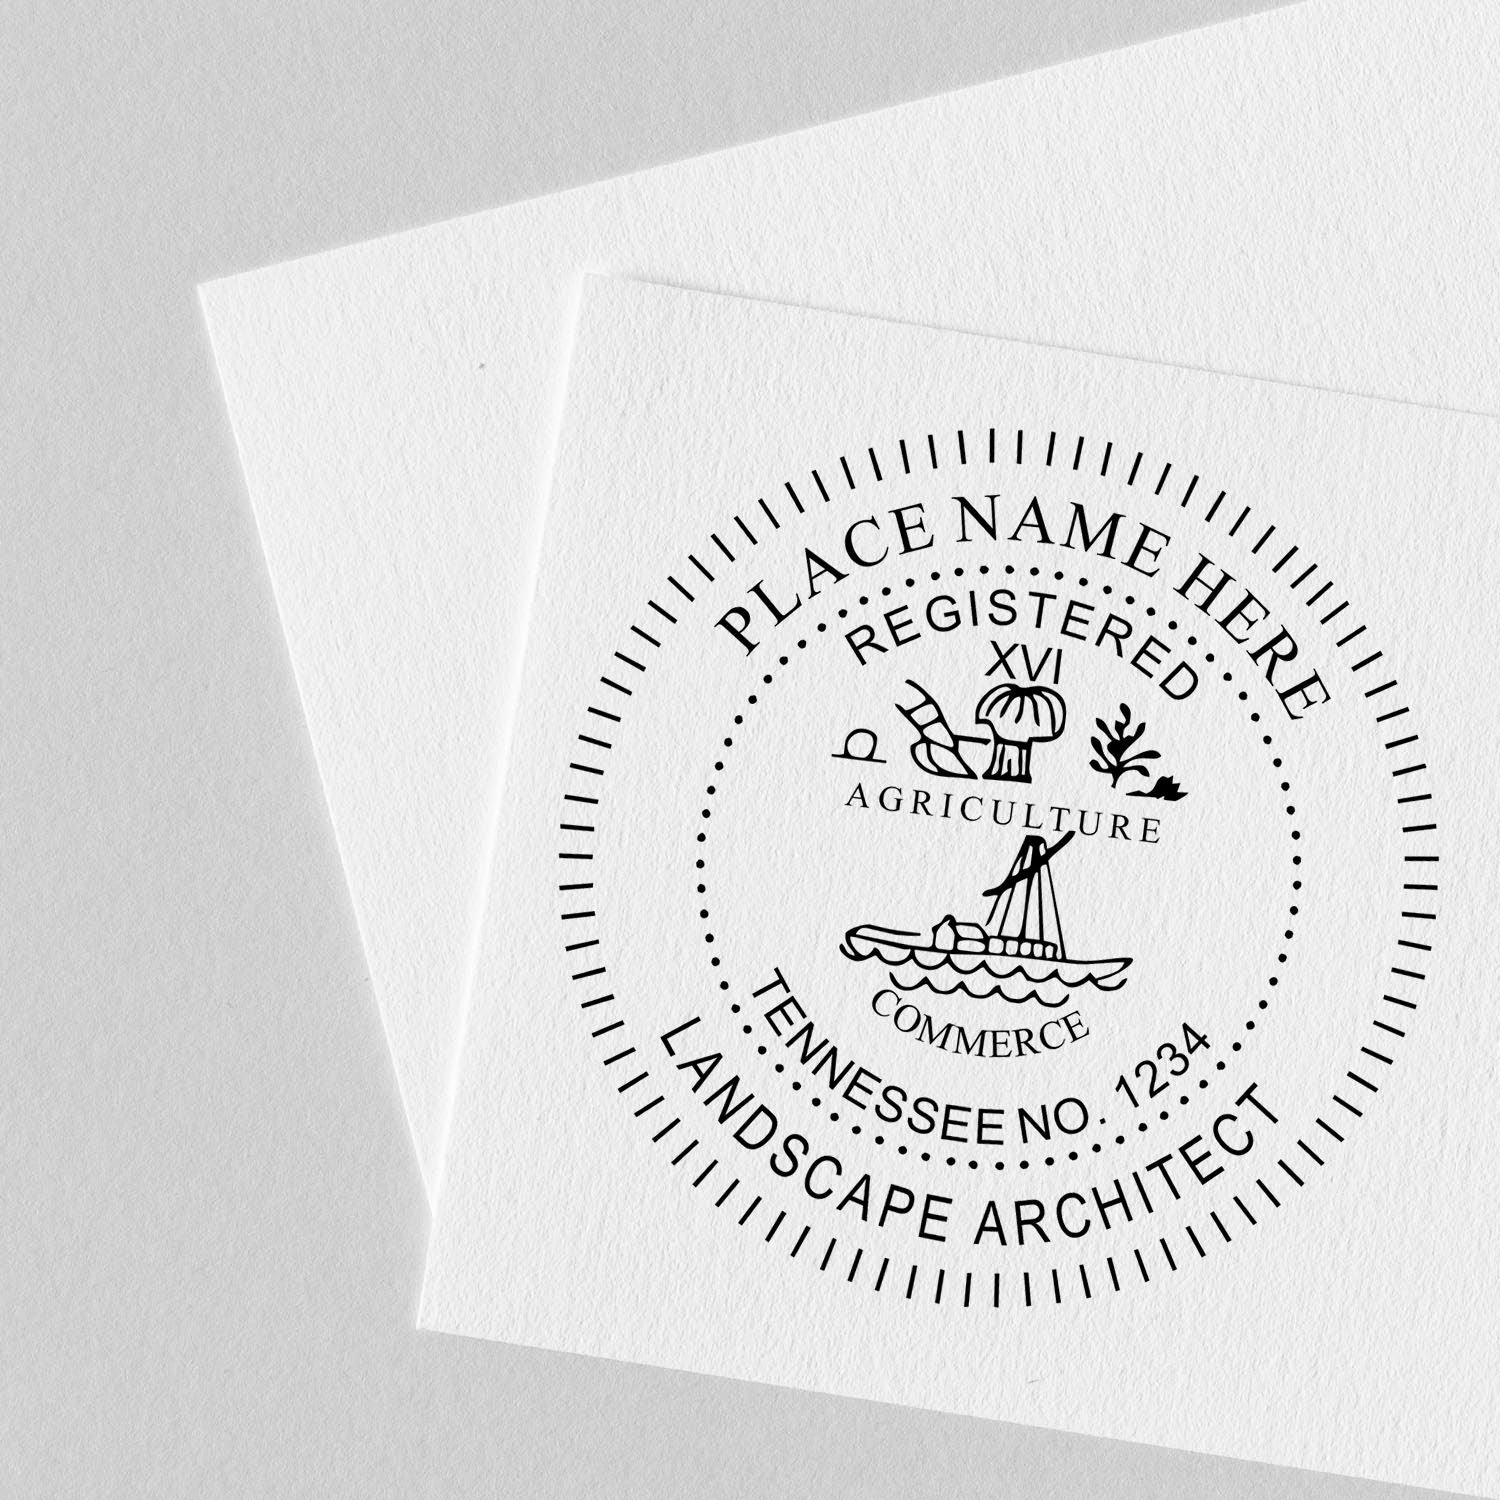 A lifestyle photo showing a stamped image of the Digital Tennessee Landscape Architect Stamp on a piece of paper